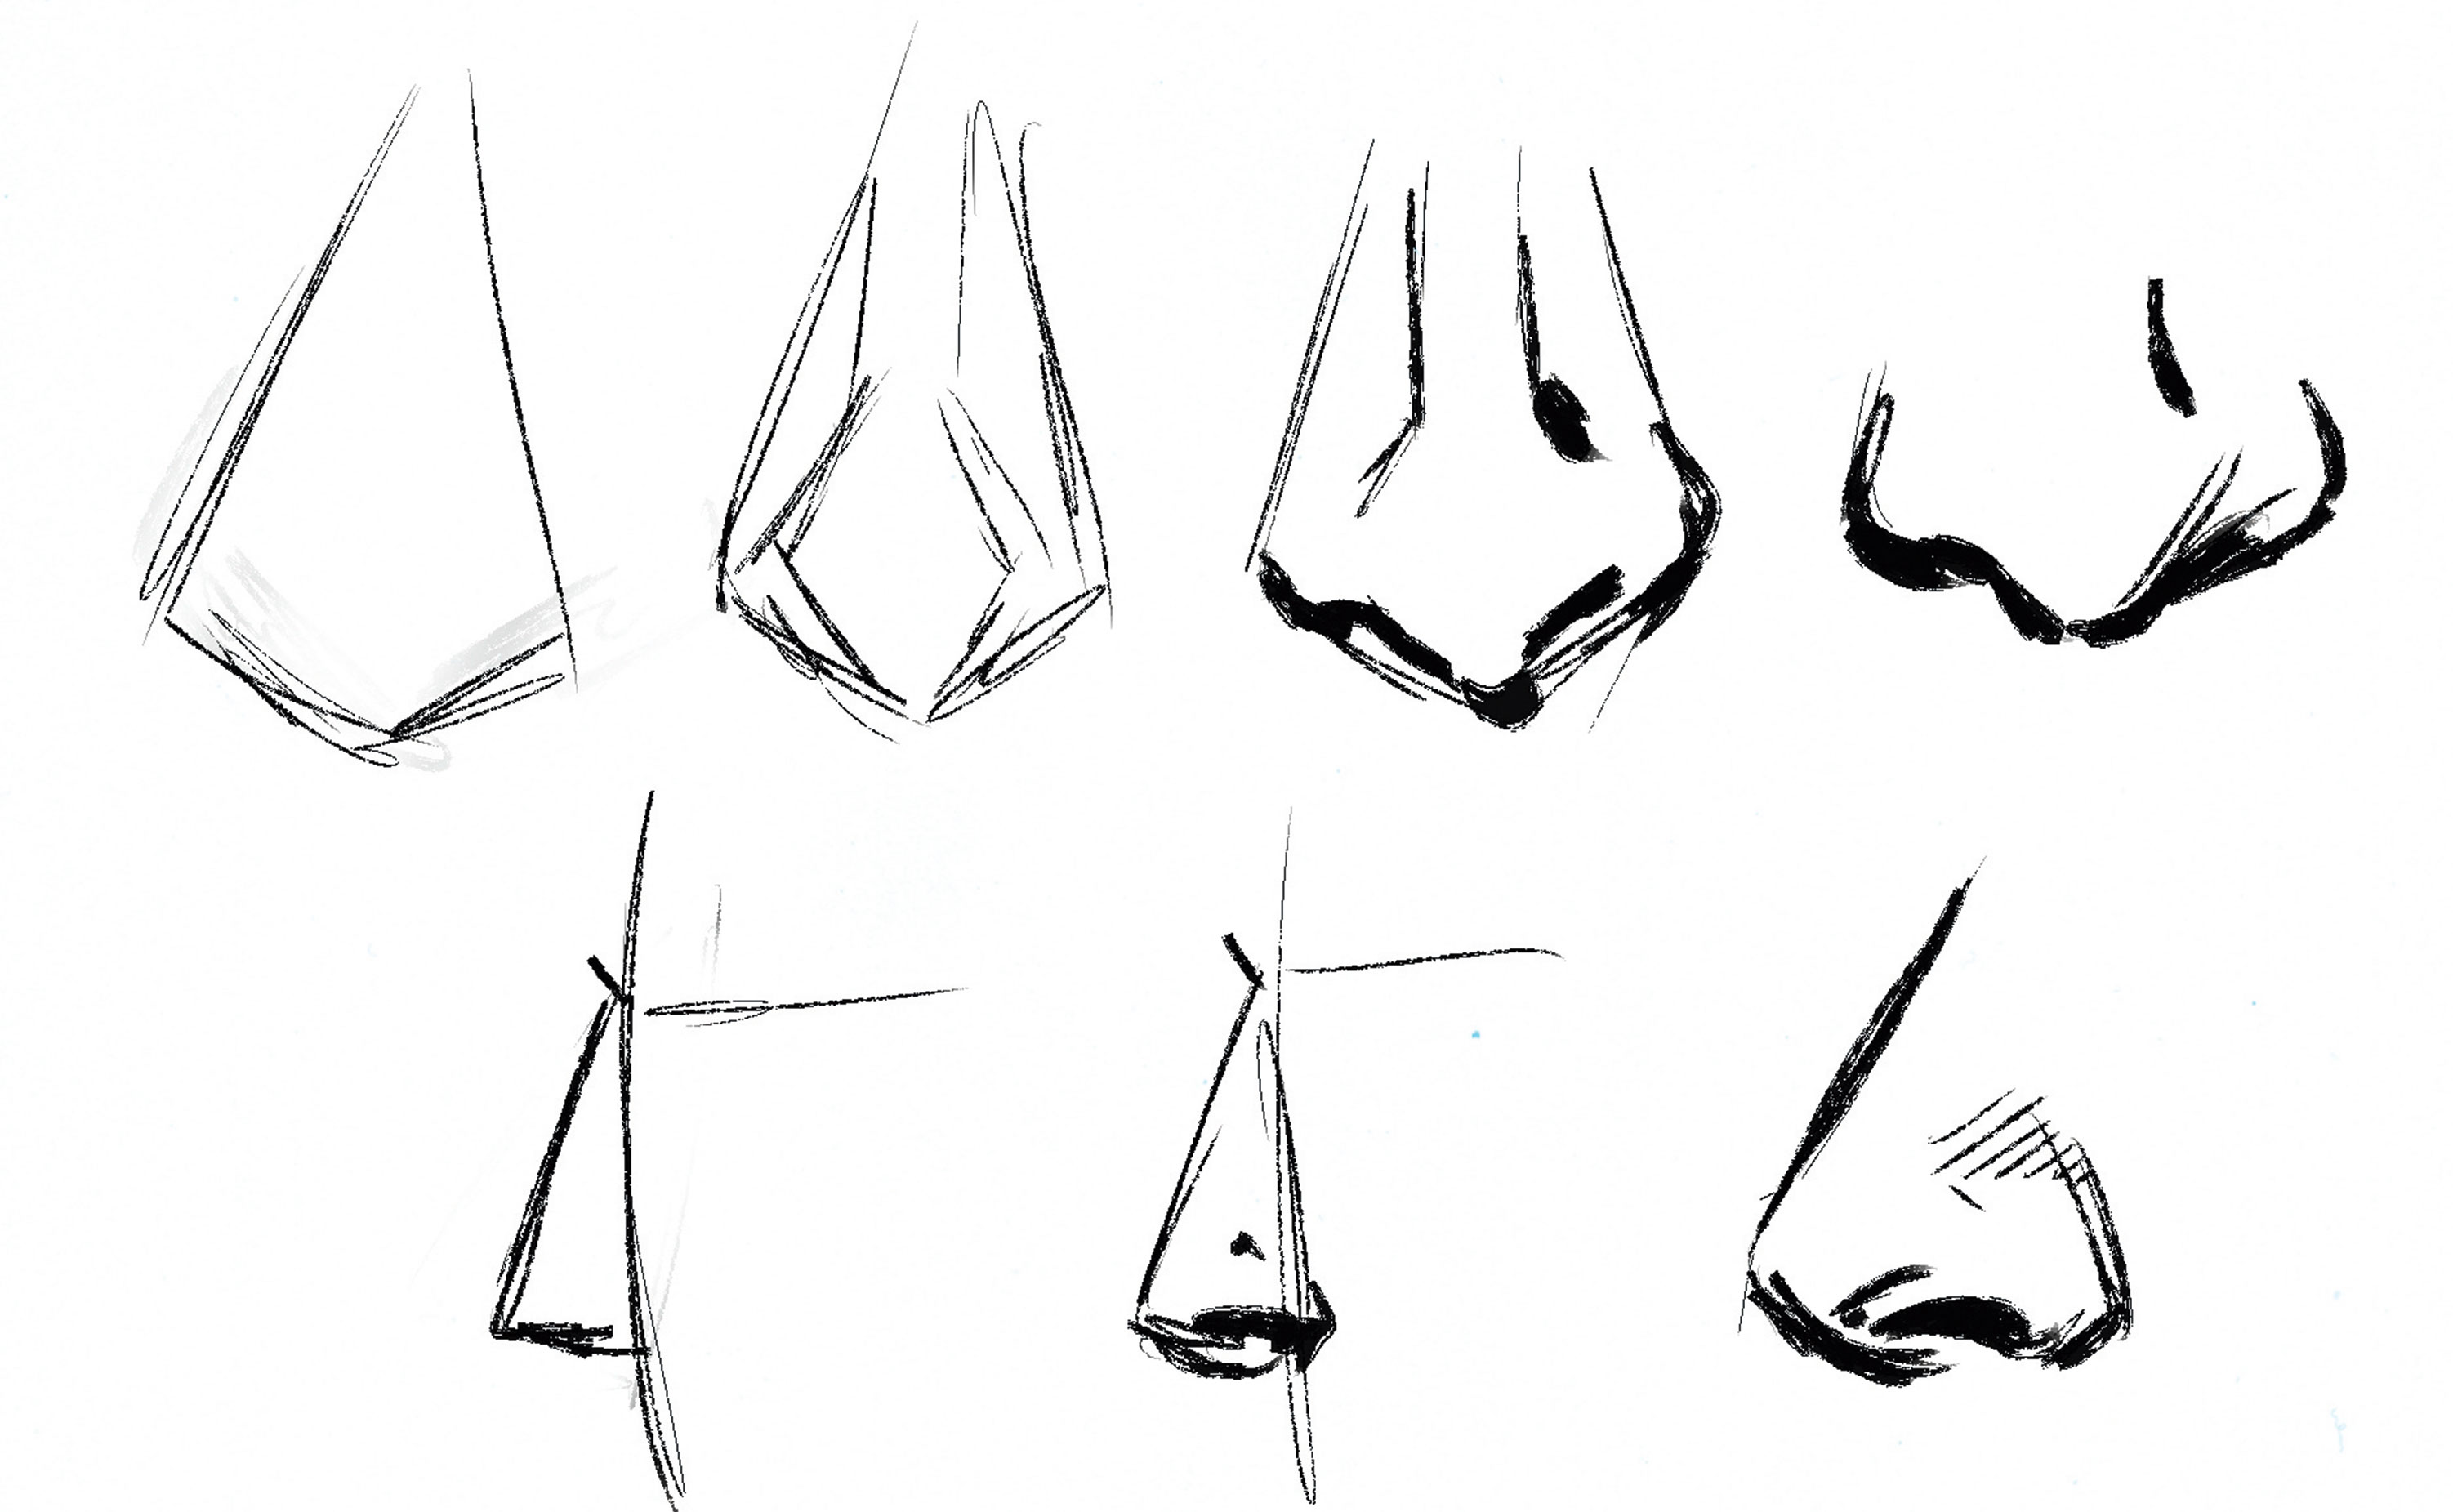 Several illustrations of noses